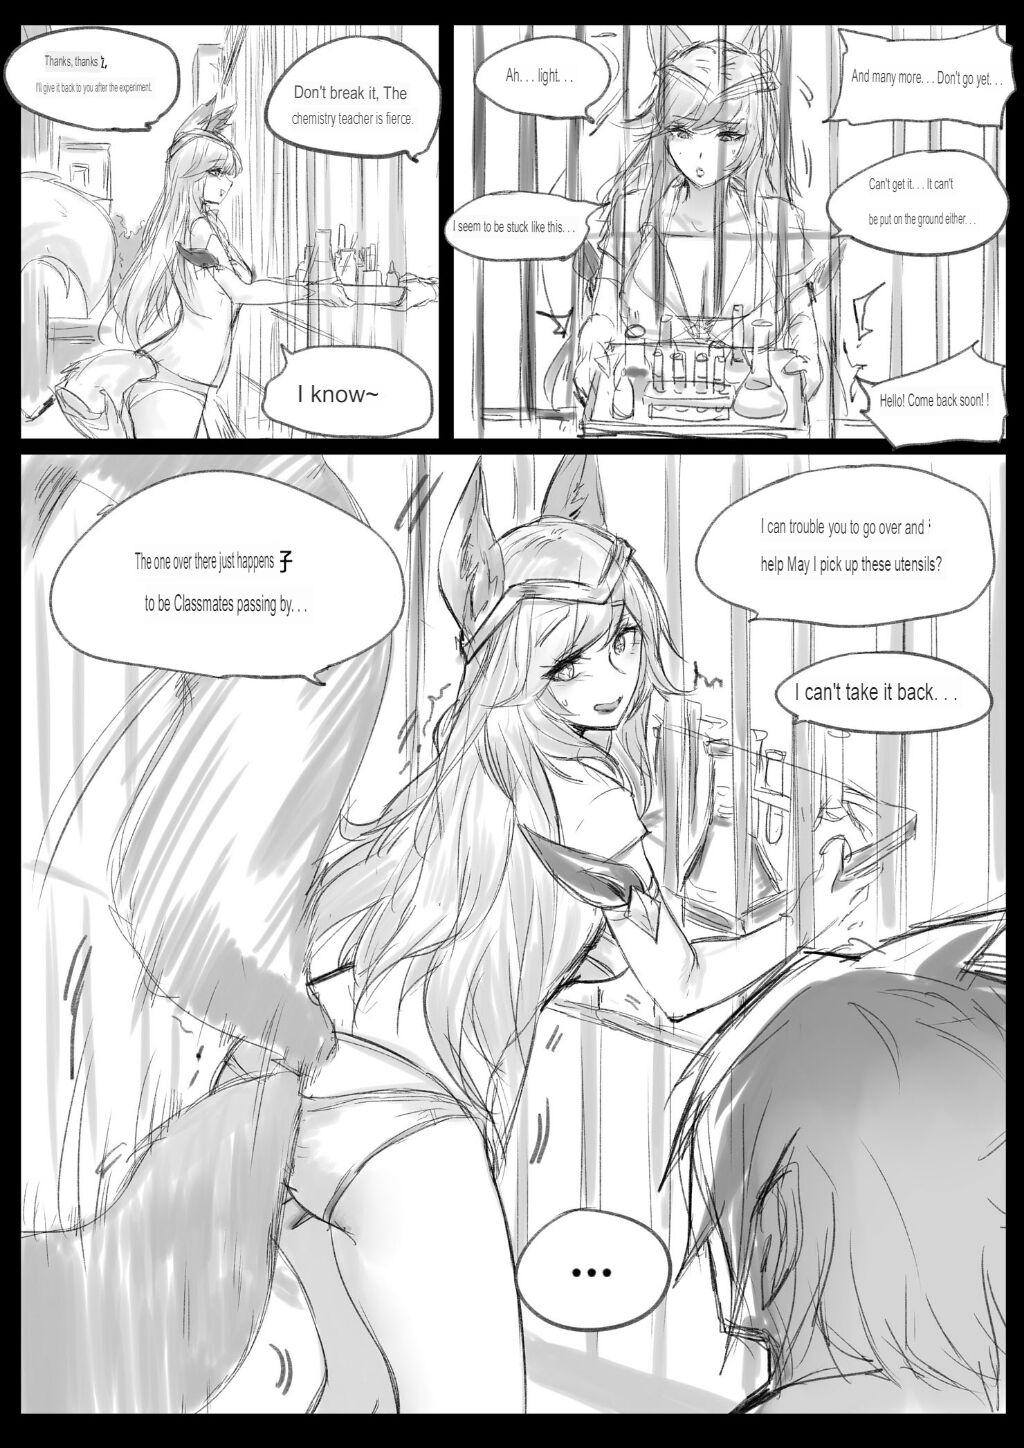 Euro Sex Guardian 3 - League of legends Dick Sucking - Page 11